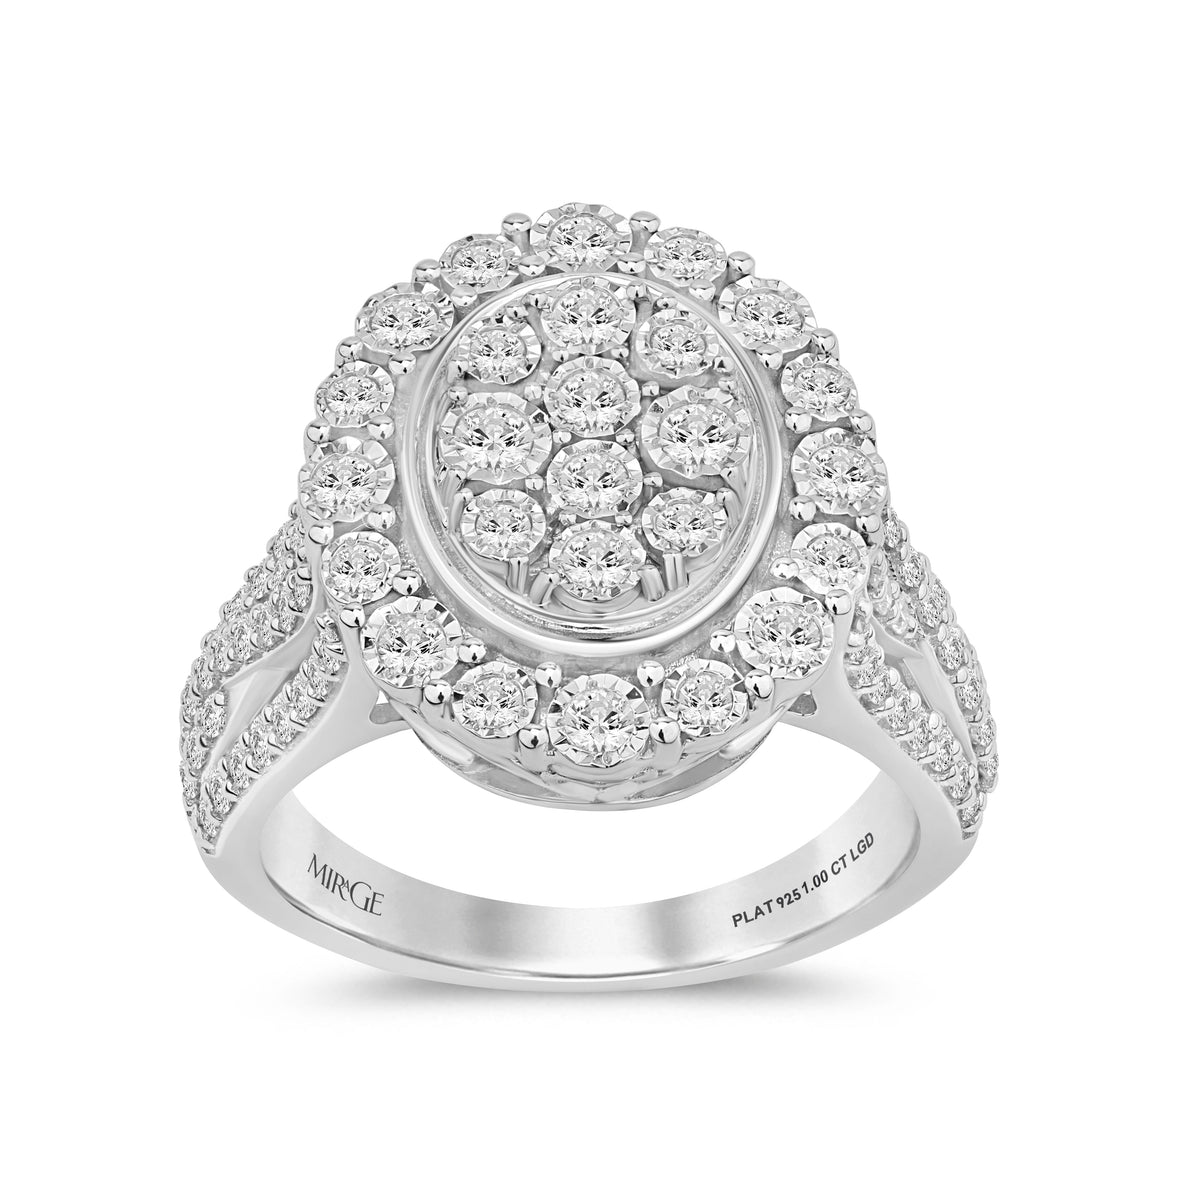 Fancy Halo Oval Shaped Ring with 1.00ct of Laboratory Grown Diamonds in Sterling Silver and Platinum Rings Bevilles 